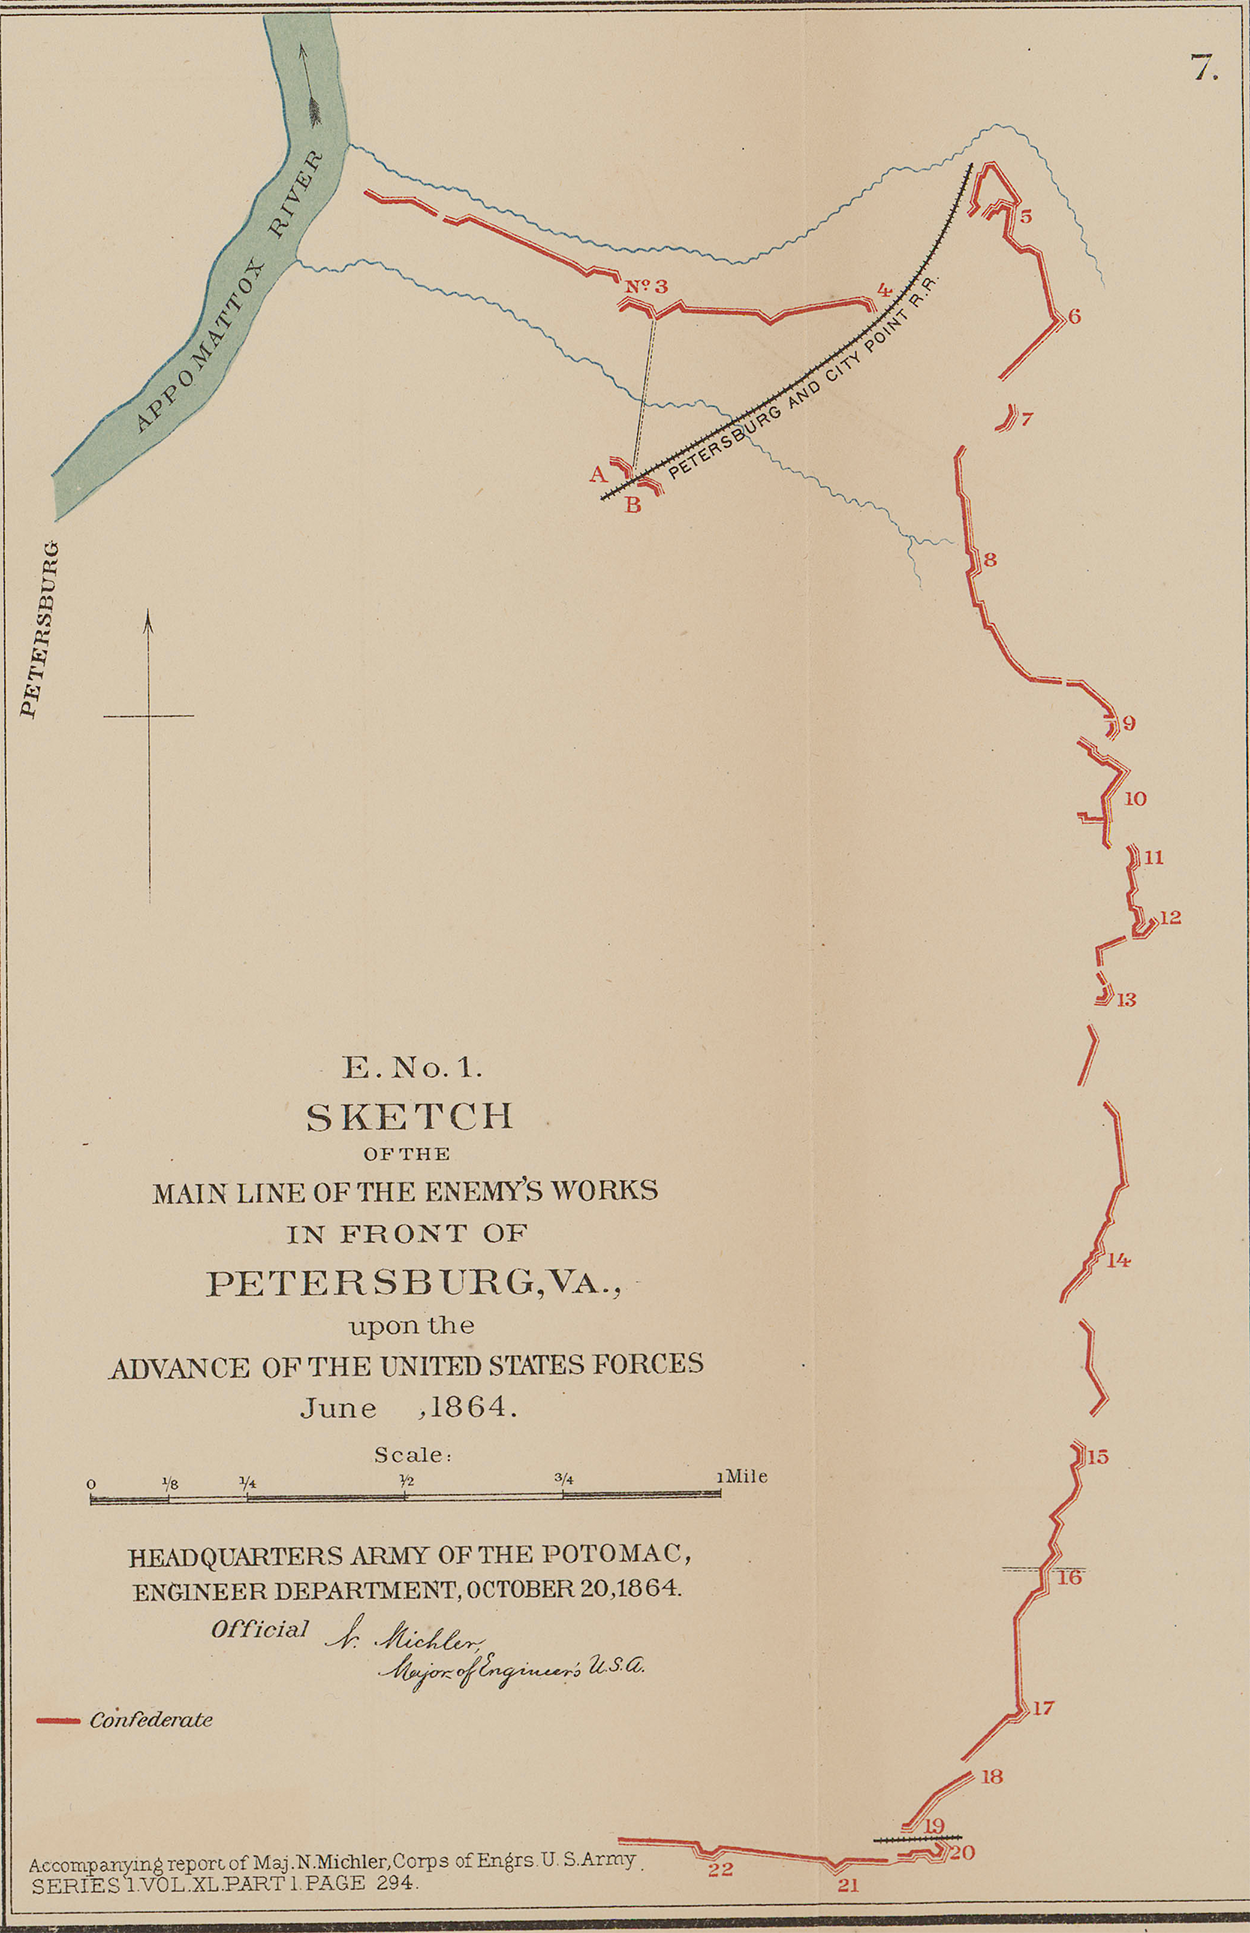 ORAtlasPlate105Map7 E. No. 1. Sketch of the Main Line of the Enemy's Works in Front of Petersburg VA. upon the Advance of the United States Forces June 1864